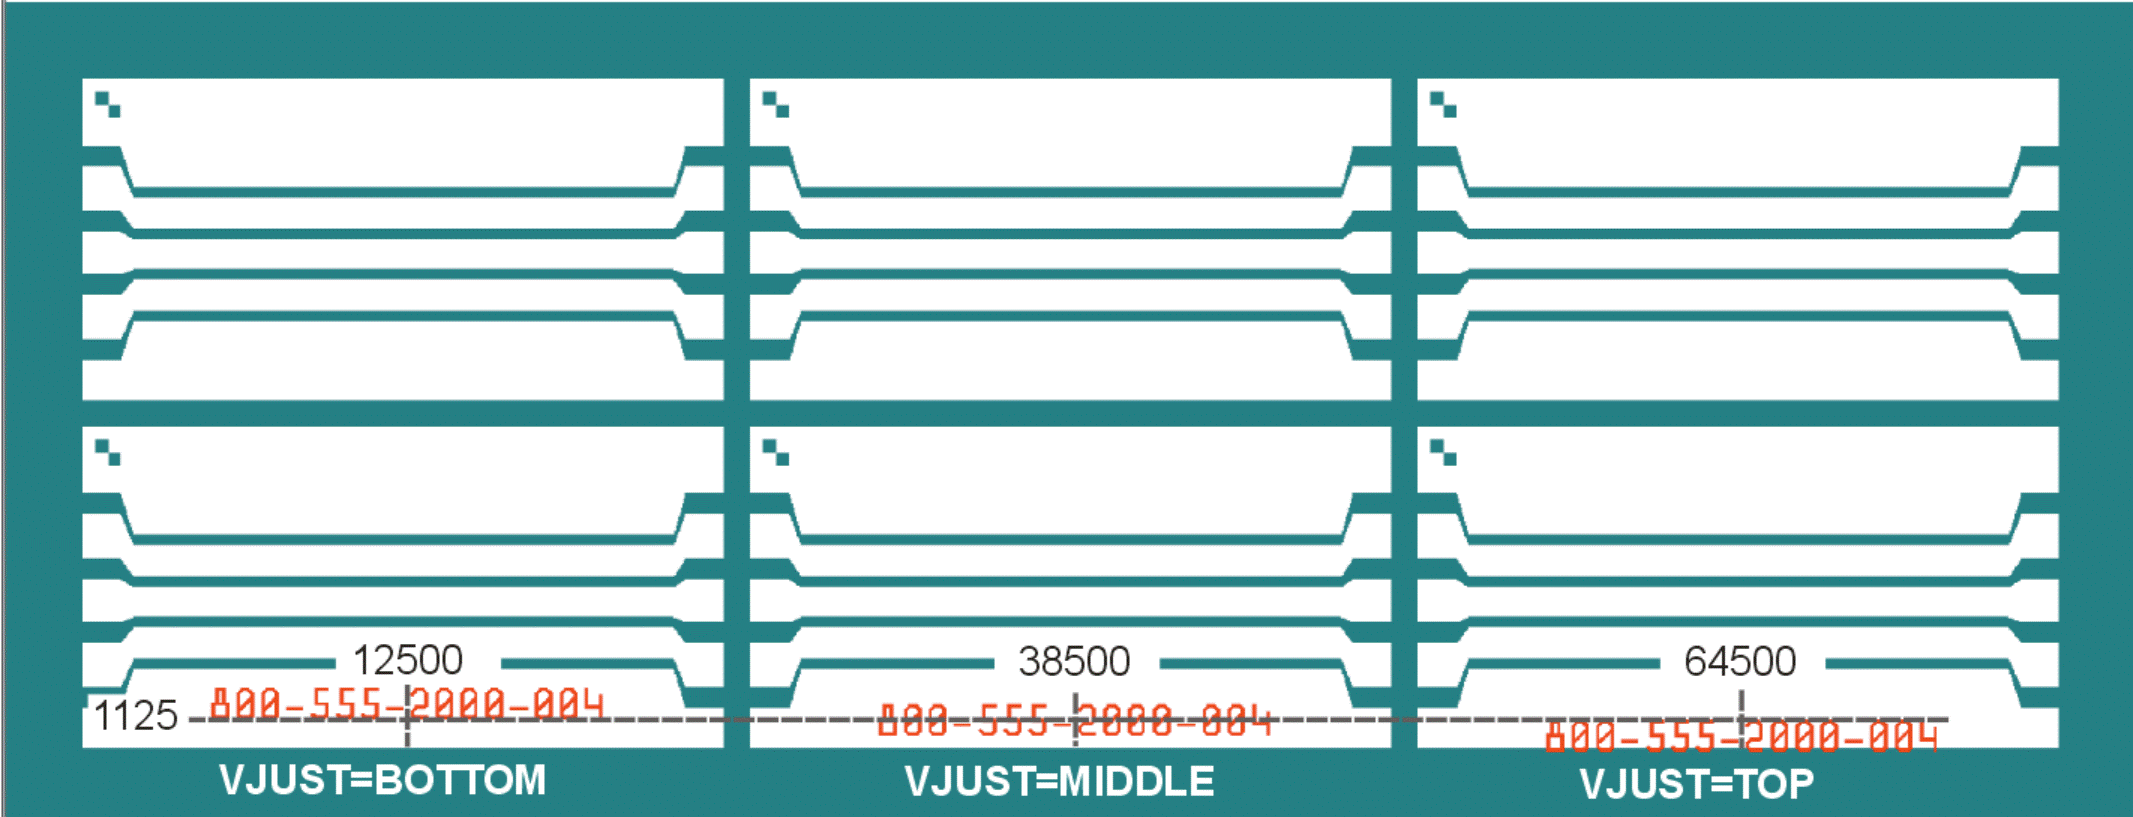 text position for VJUST = BOTTOM, MIDDLE, TOP